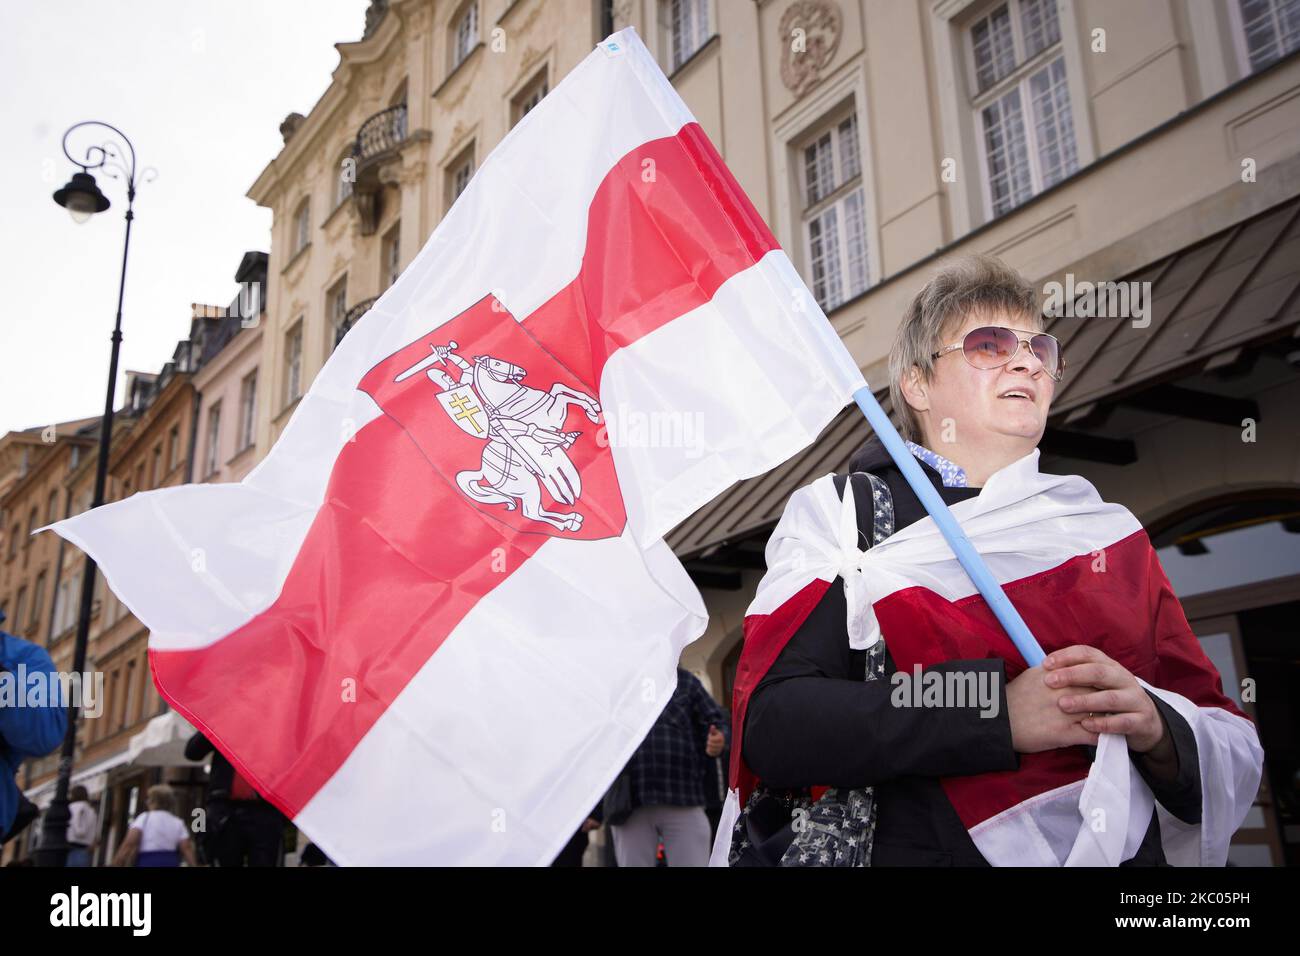 A woman is seen holding the Belarusian White-Red-White flag with the Pogon symbol in Warsaw, Poland on September 19, 2020. Several dozen people, mostly Belarusians took part in a march in central Warsaw to celebrate the first use of the White-Red-White flag in 19 September 1991, the alternative flag that is now a symbol of the Belarusian opposition. (Photo by Jaap Arriens/NurPhoto) Stock Photo